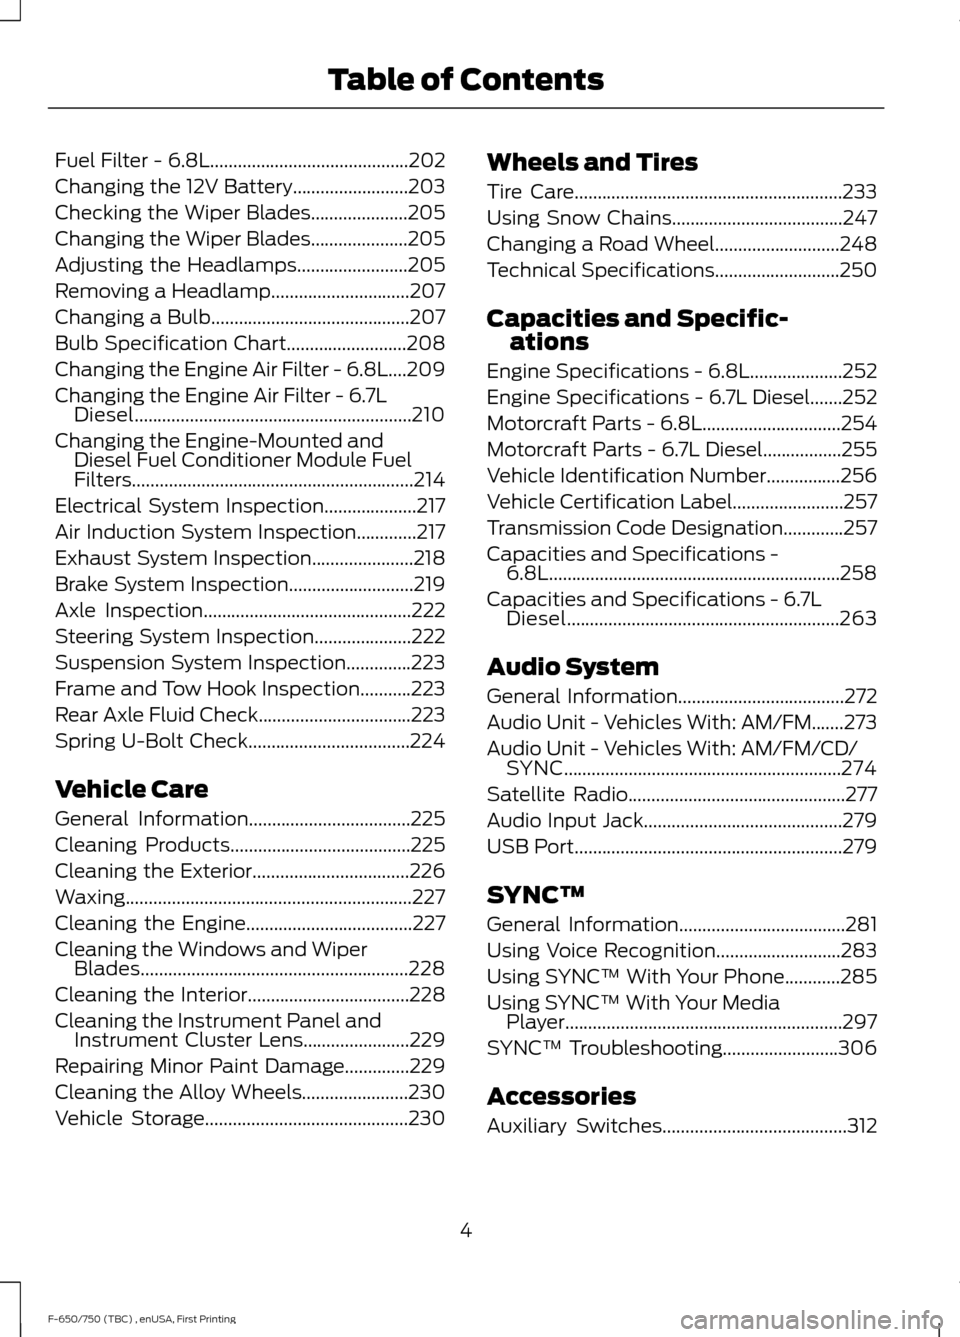 FORD F750 2017 13.G Owners Manual Fuel Filter - 6.8L...........................................202
Changing the 12V Battery.........................203
Checking the Wiper Blades.....................205
Changing the Wiper Blades.......